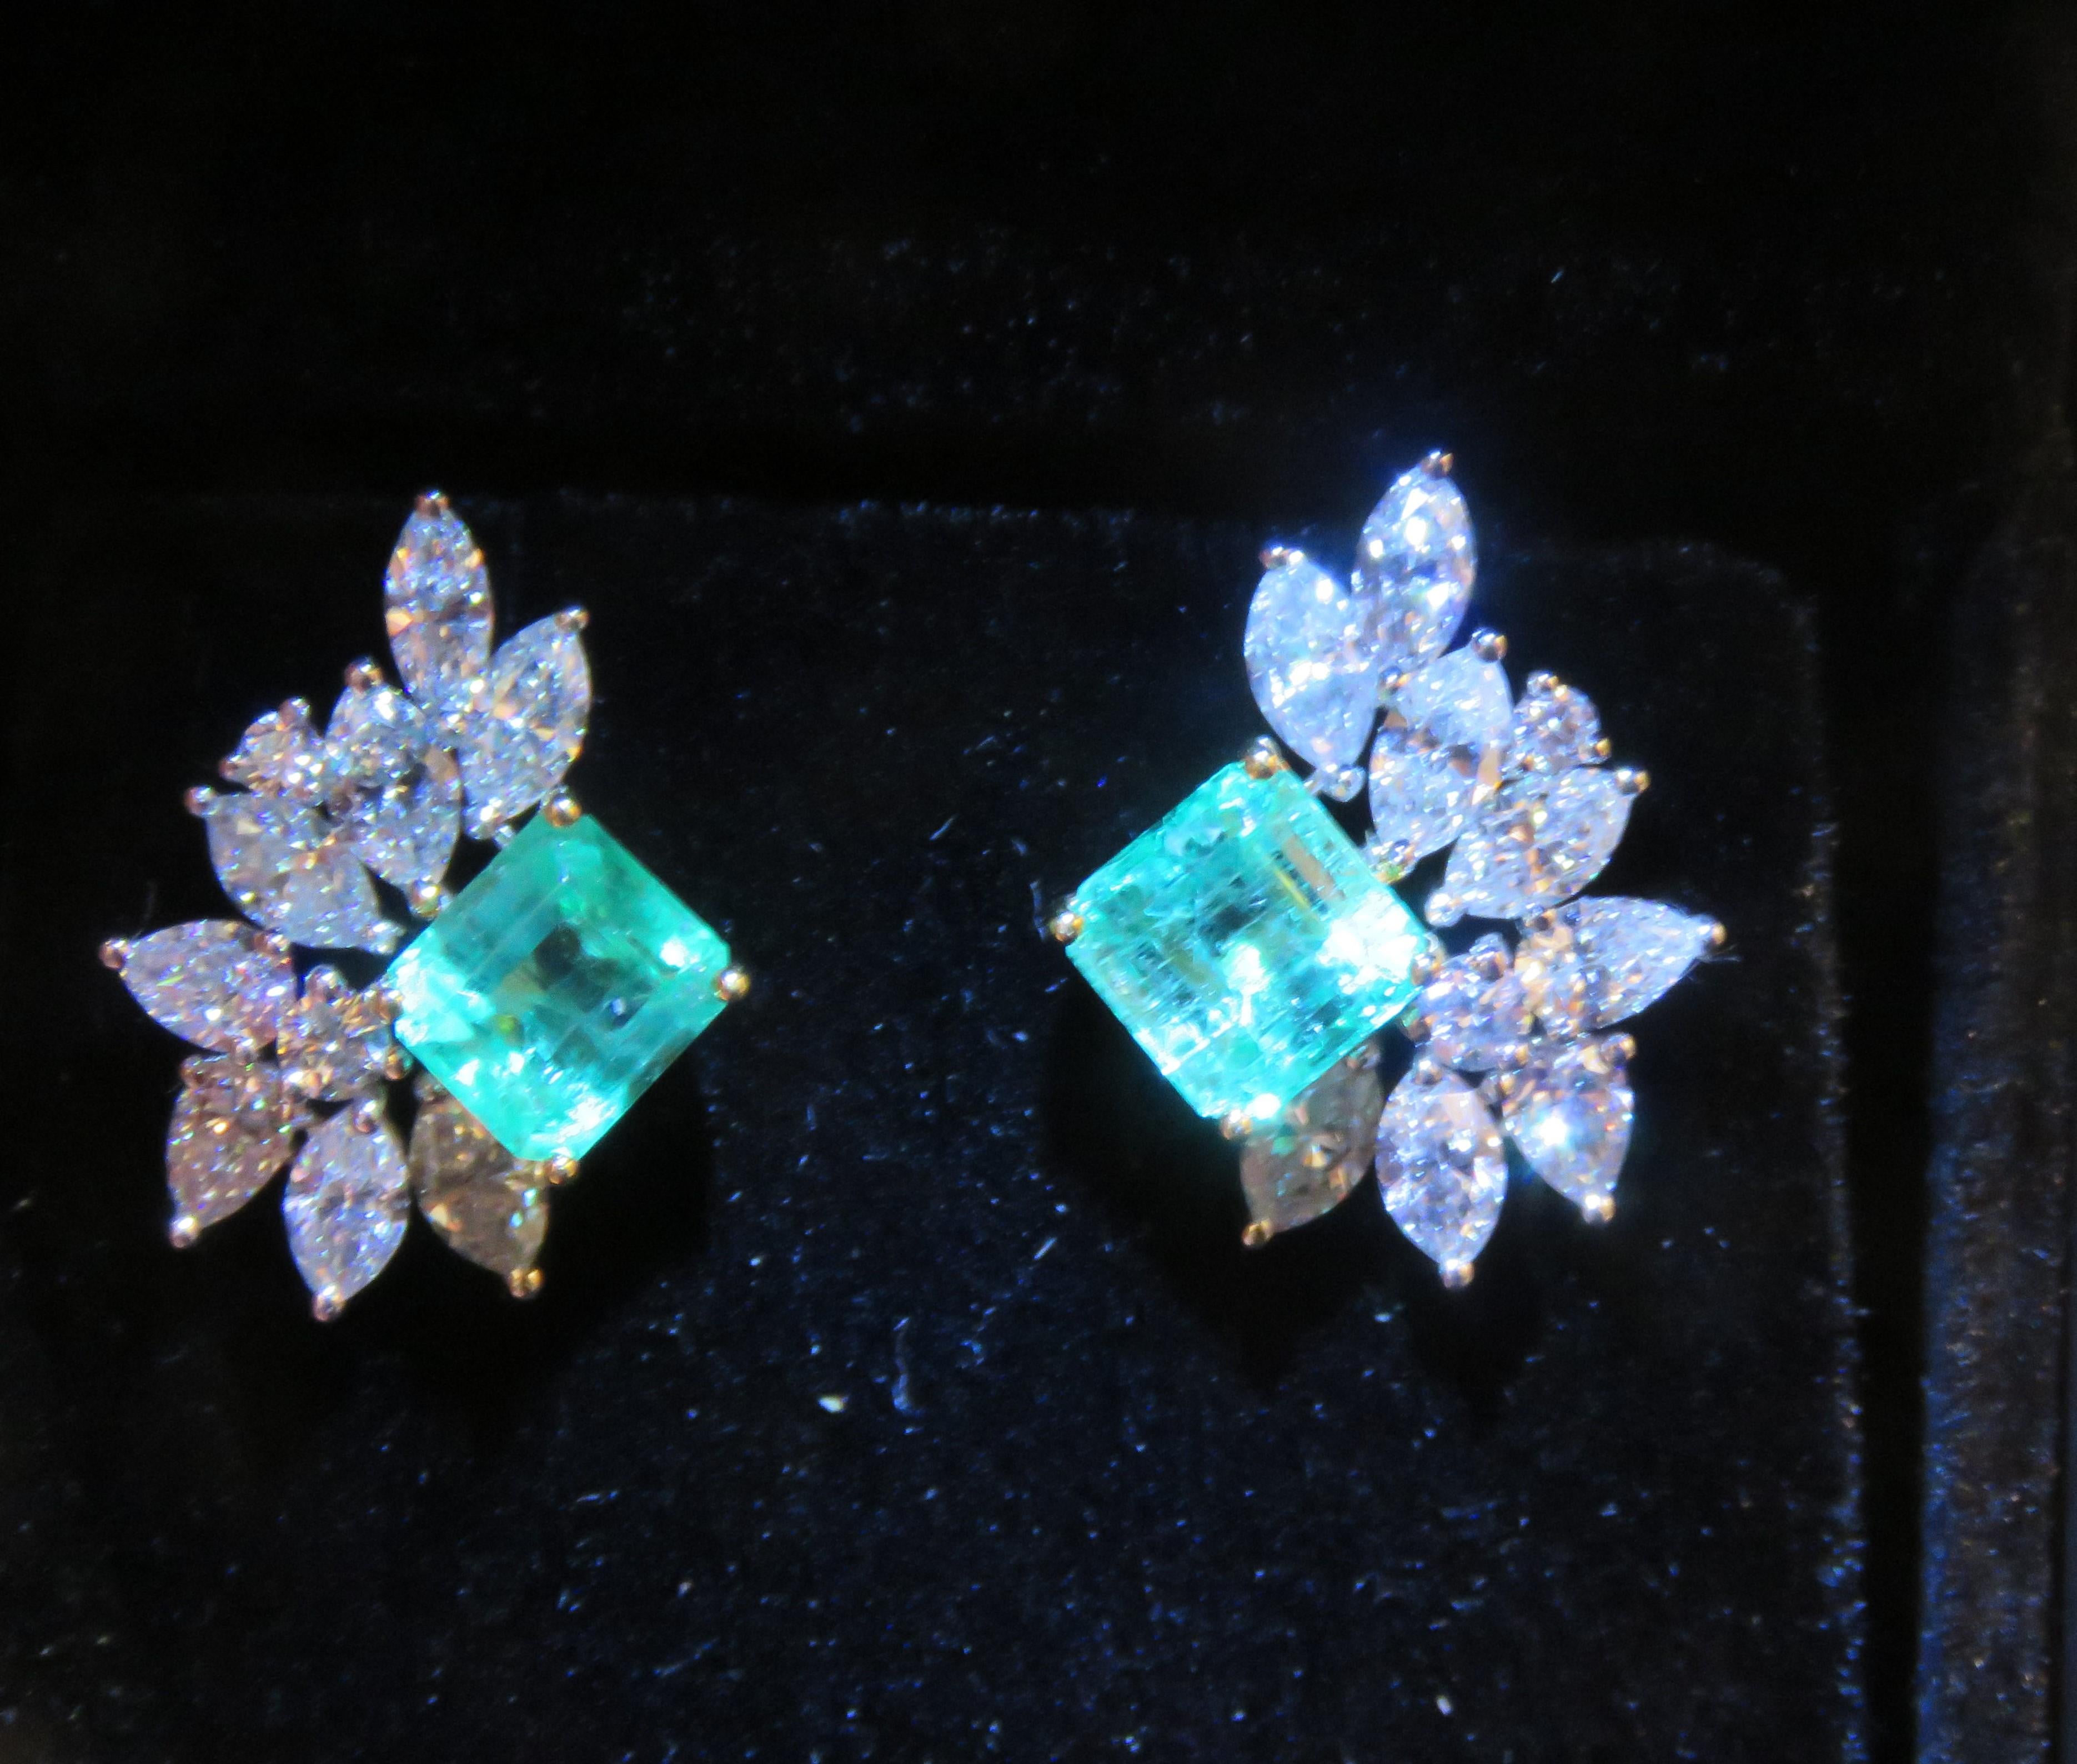 The Following Items we are offering is a Rare Important Radiant 18KT White Gold Elaborate Colombian Emerald and Diamond Earrings. Magnificent Rare Large Sparkling Emeralds Fancy Flanked by Fine Glittering Marquise Shaped Diamonds!! T.C.W. Approx